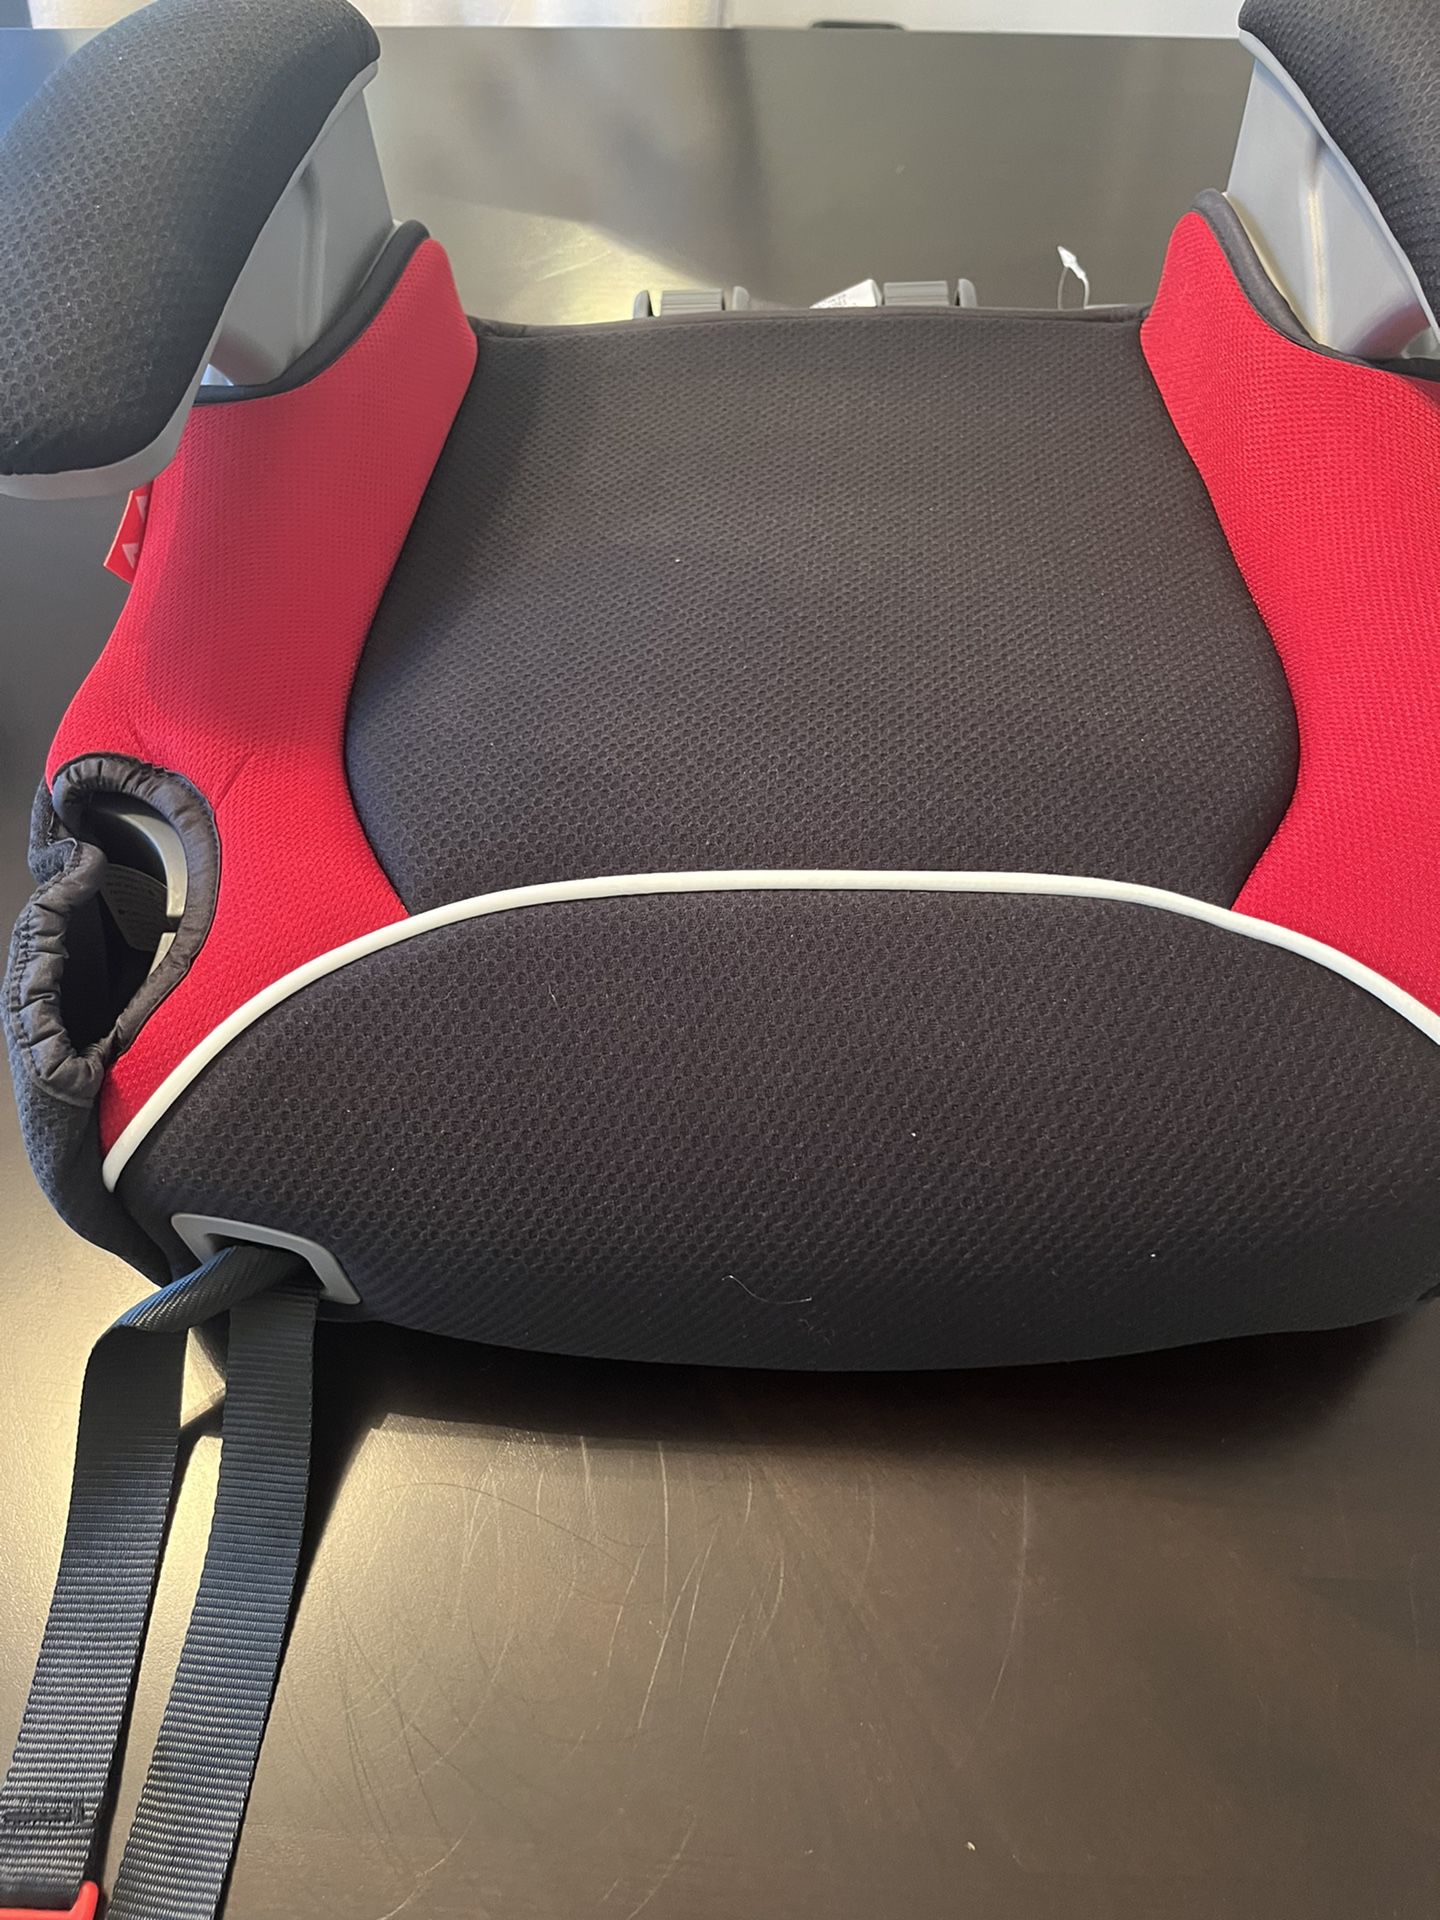 Graco TurboBooster LX Backless Booster Car Seat with Latch System